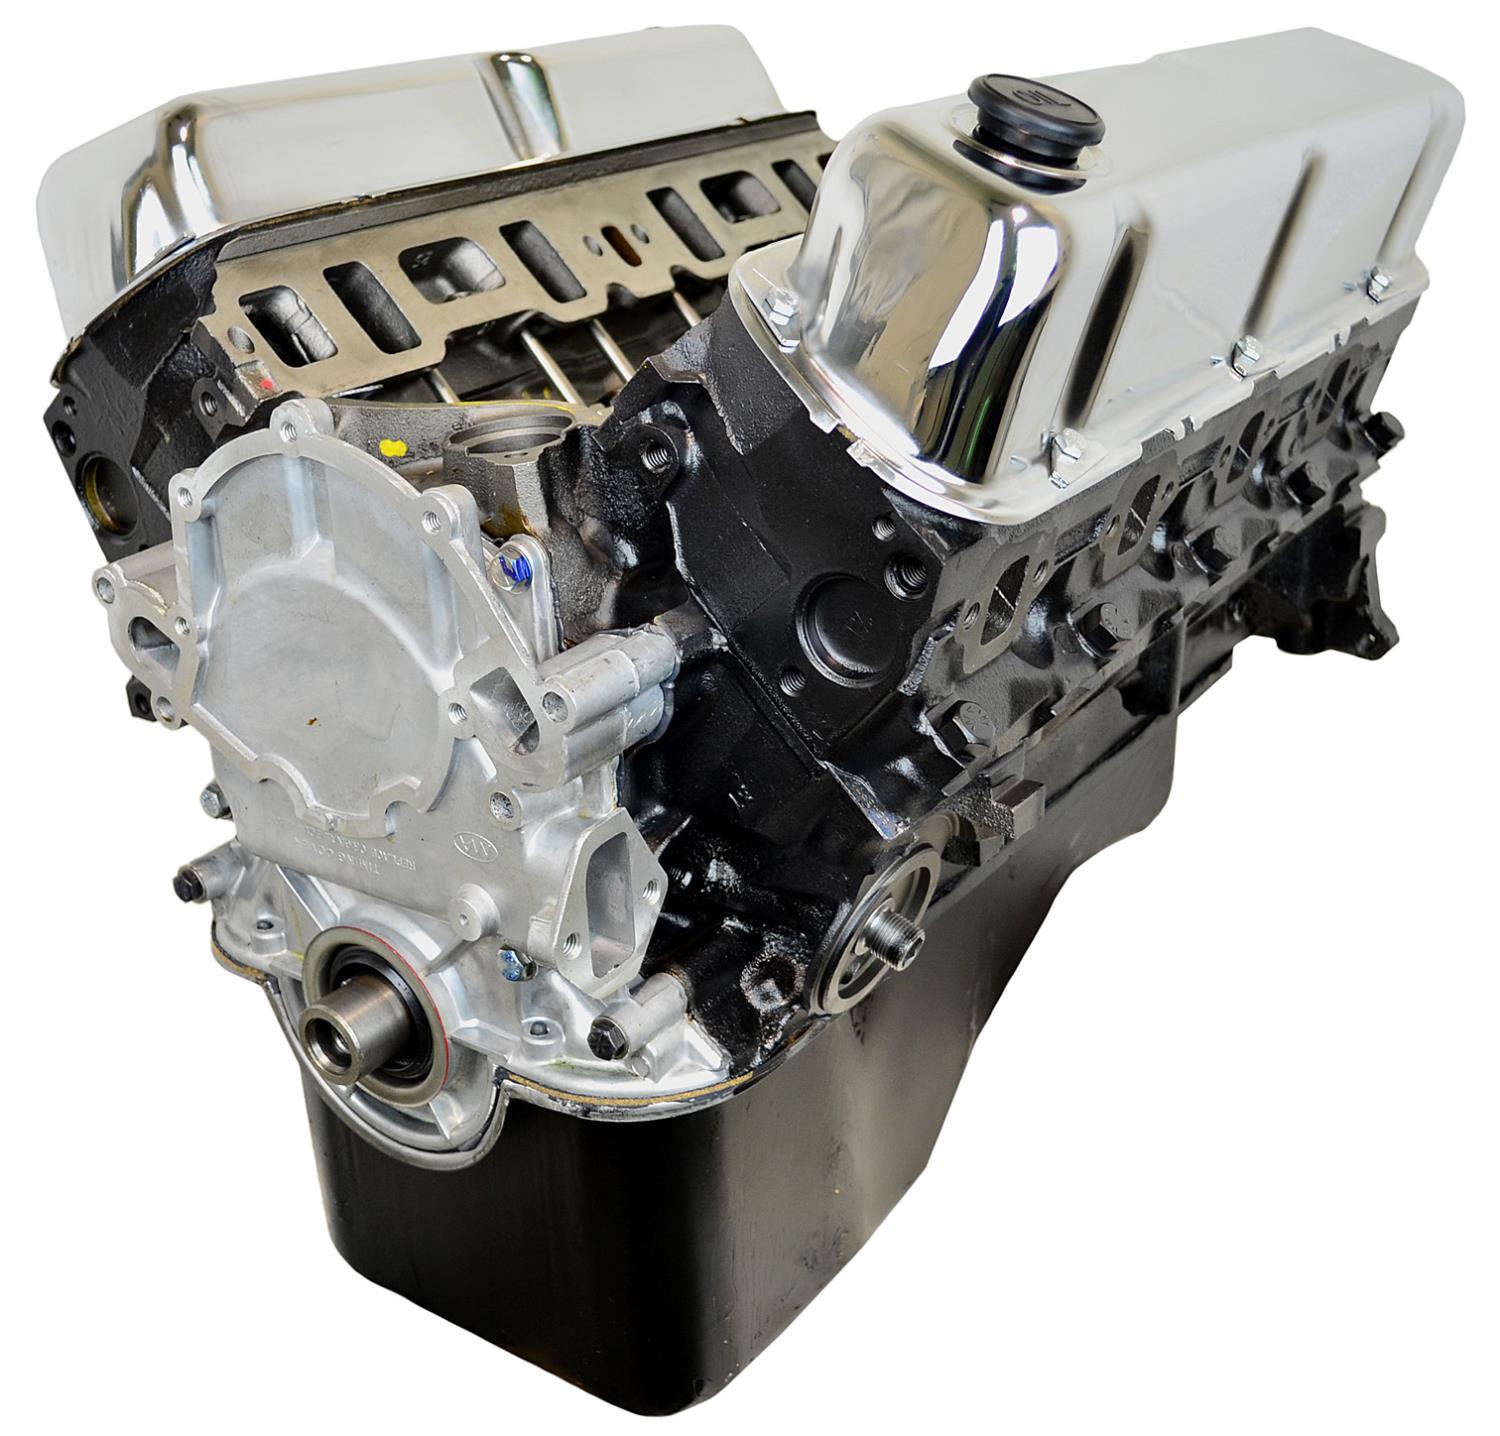 HP79 High Performance Crate Engine Small Block Ford 302ci / 300HP / 336TQ